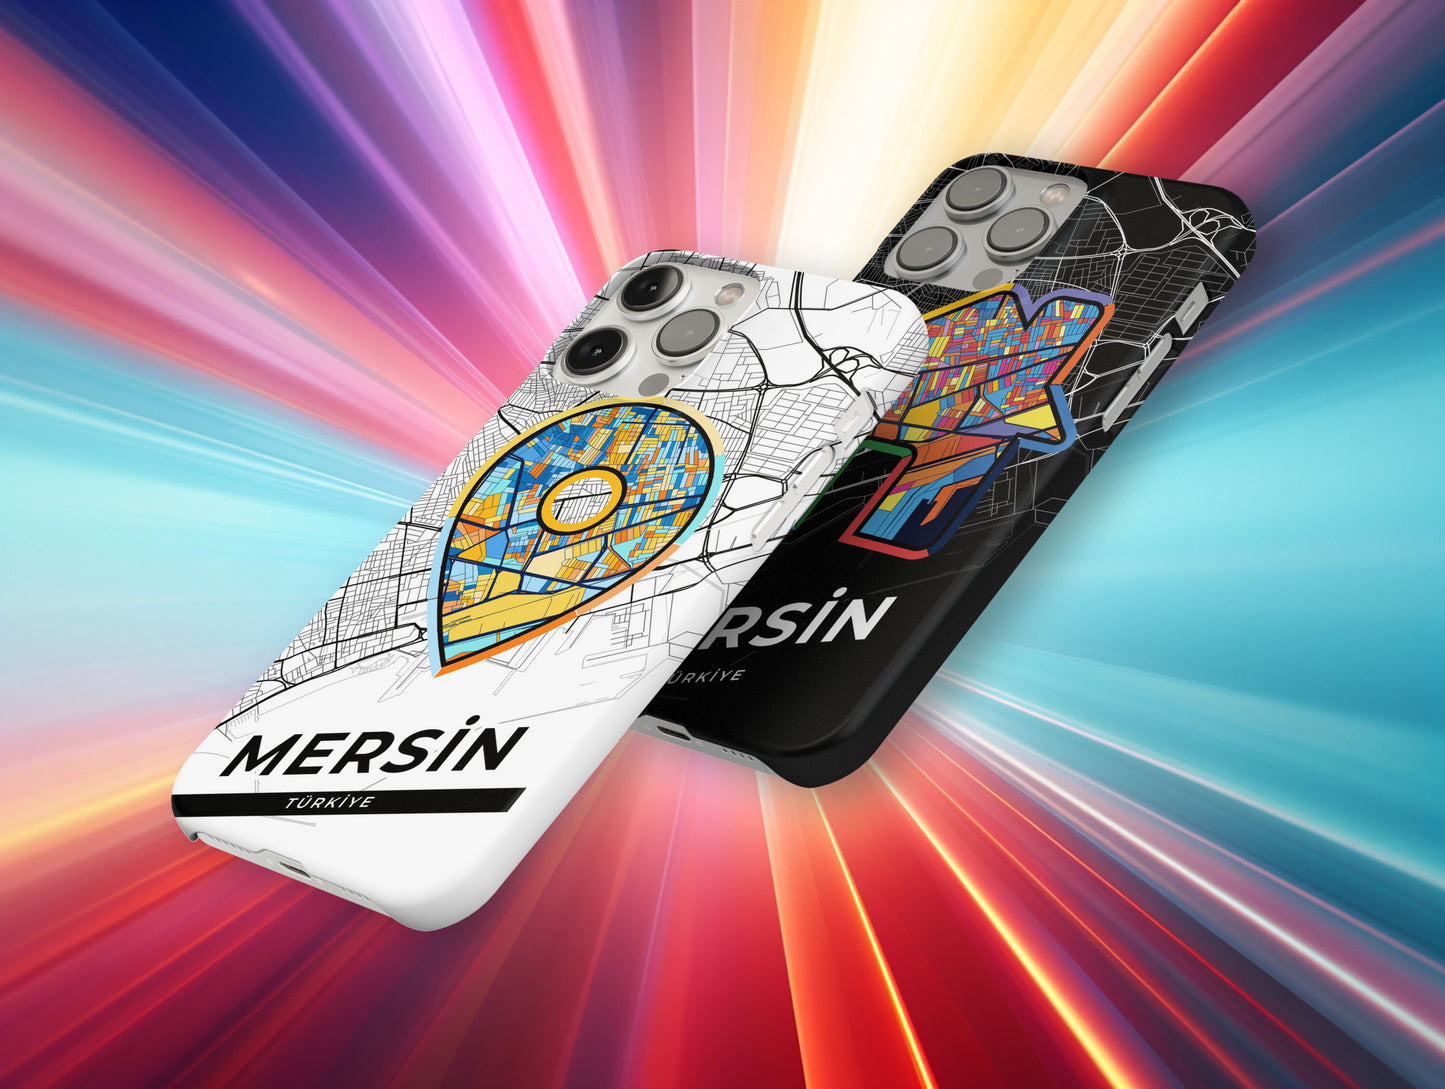 Mersin Turkey slim phone case with colorful icon